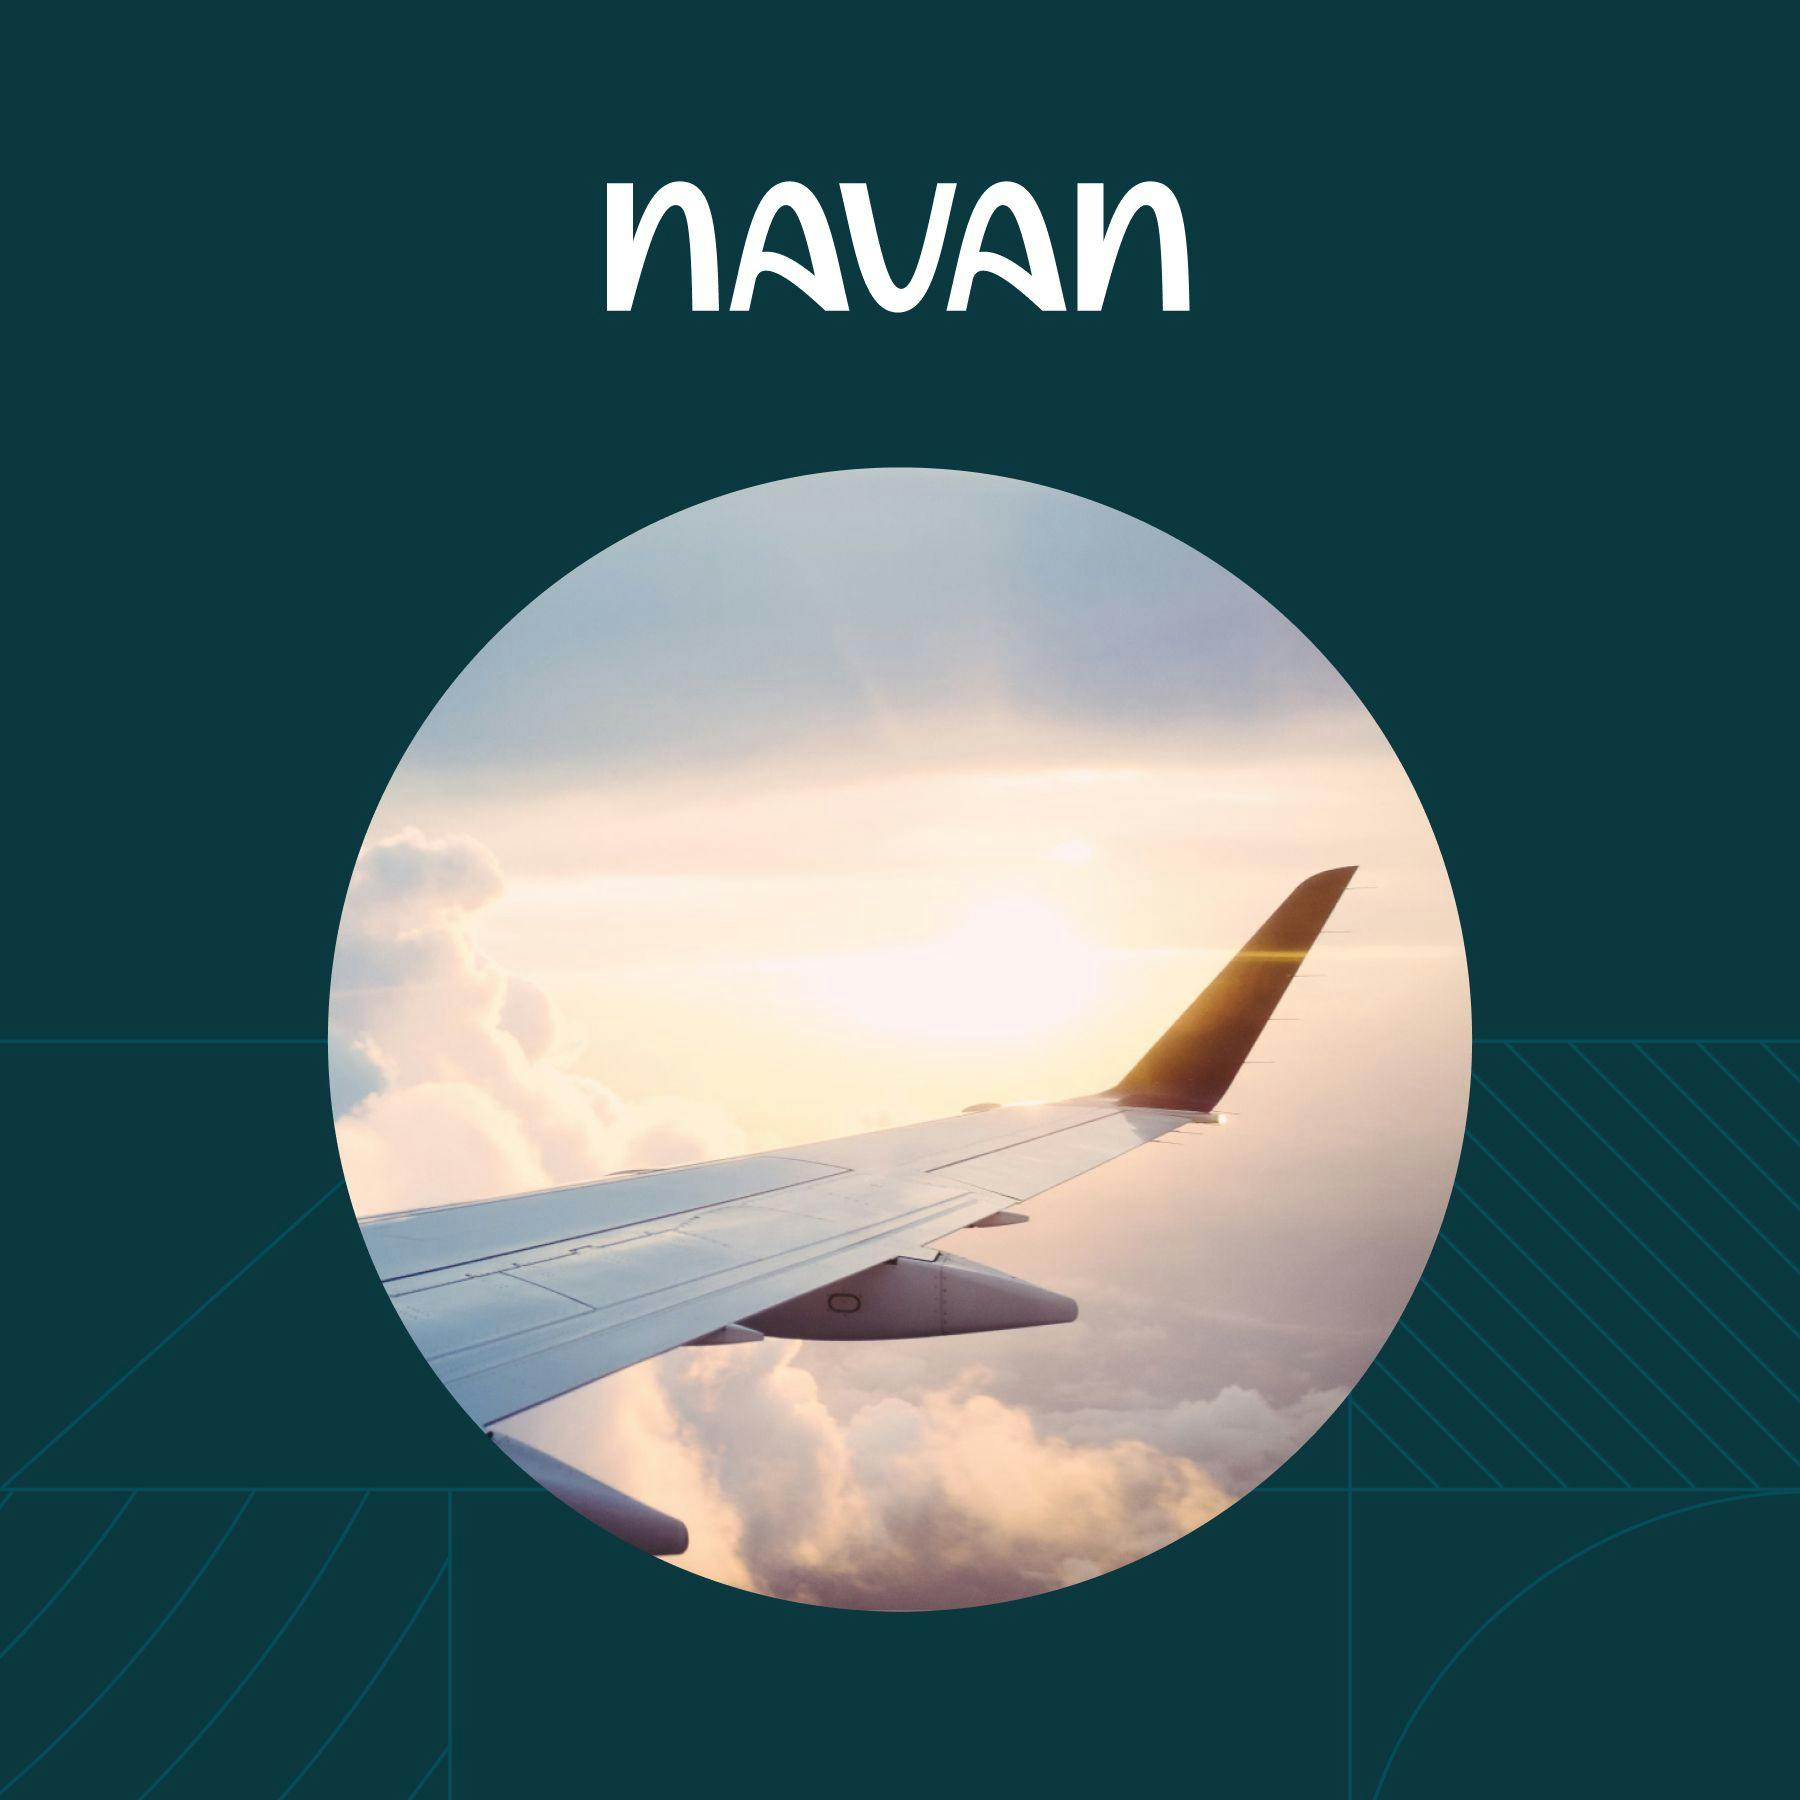 Photo of an airplane wing with the logo for Navan superimposed